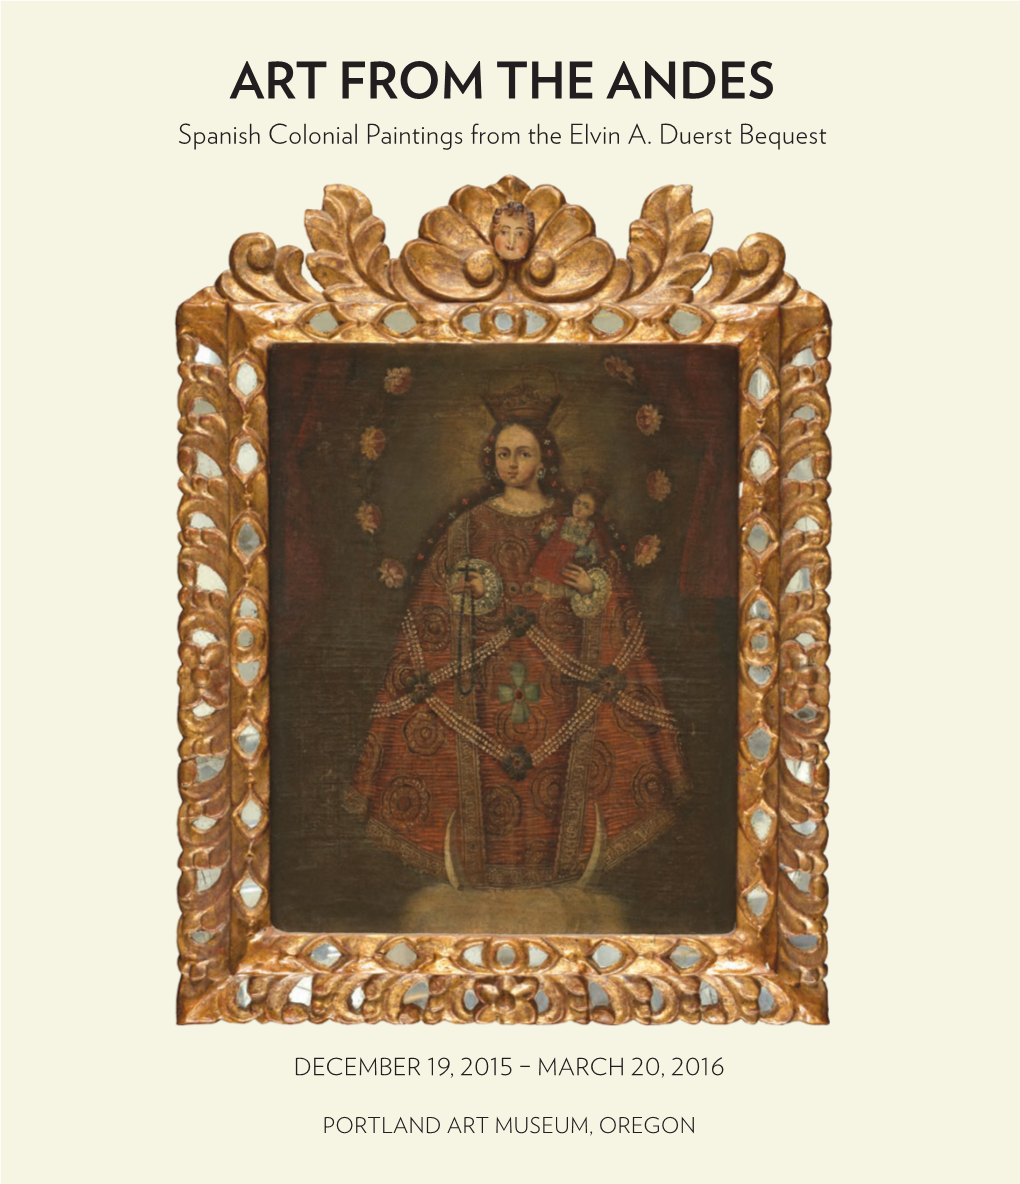 Art from the Andes: Spanish Colonial Paintings from the Elvin A. Duerst